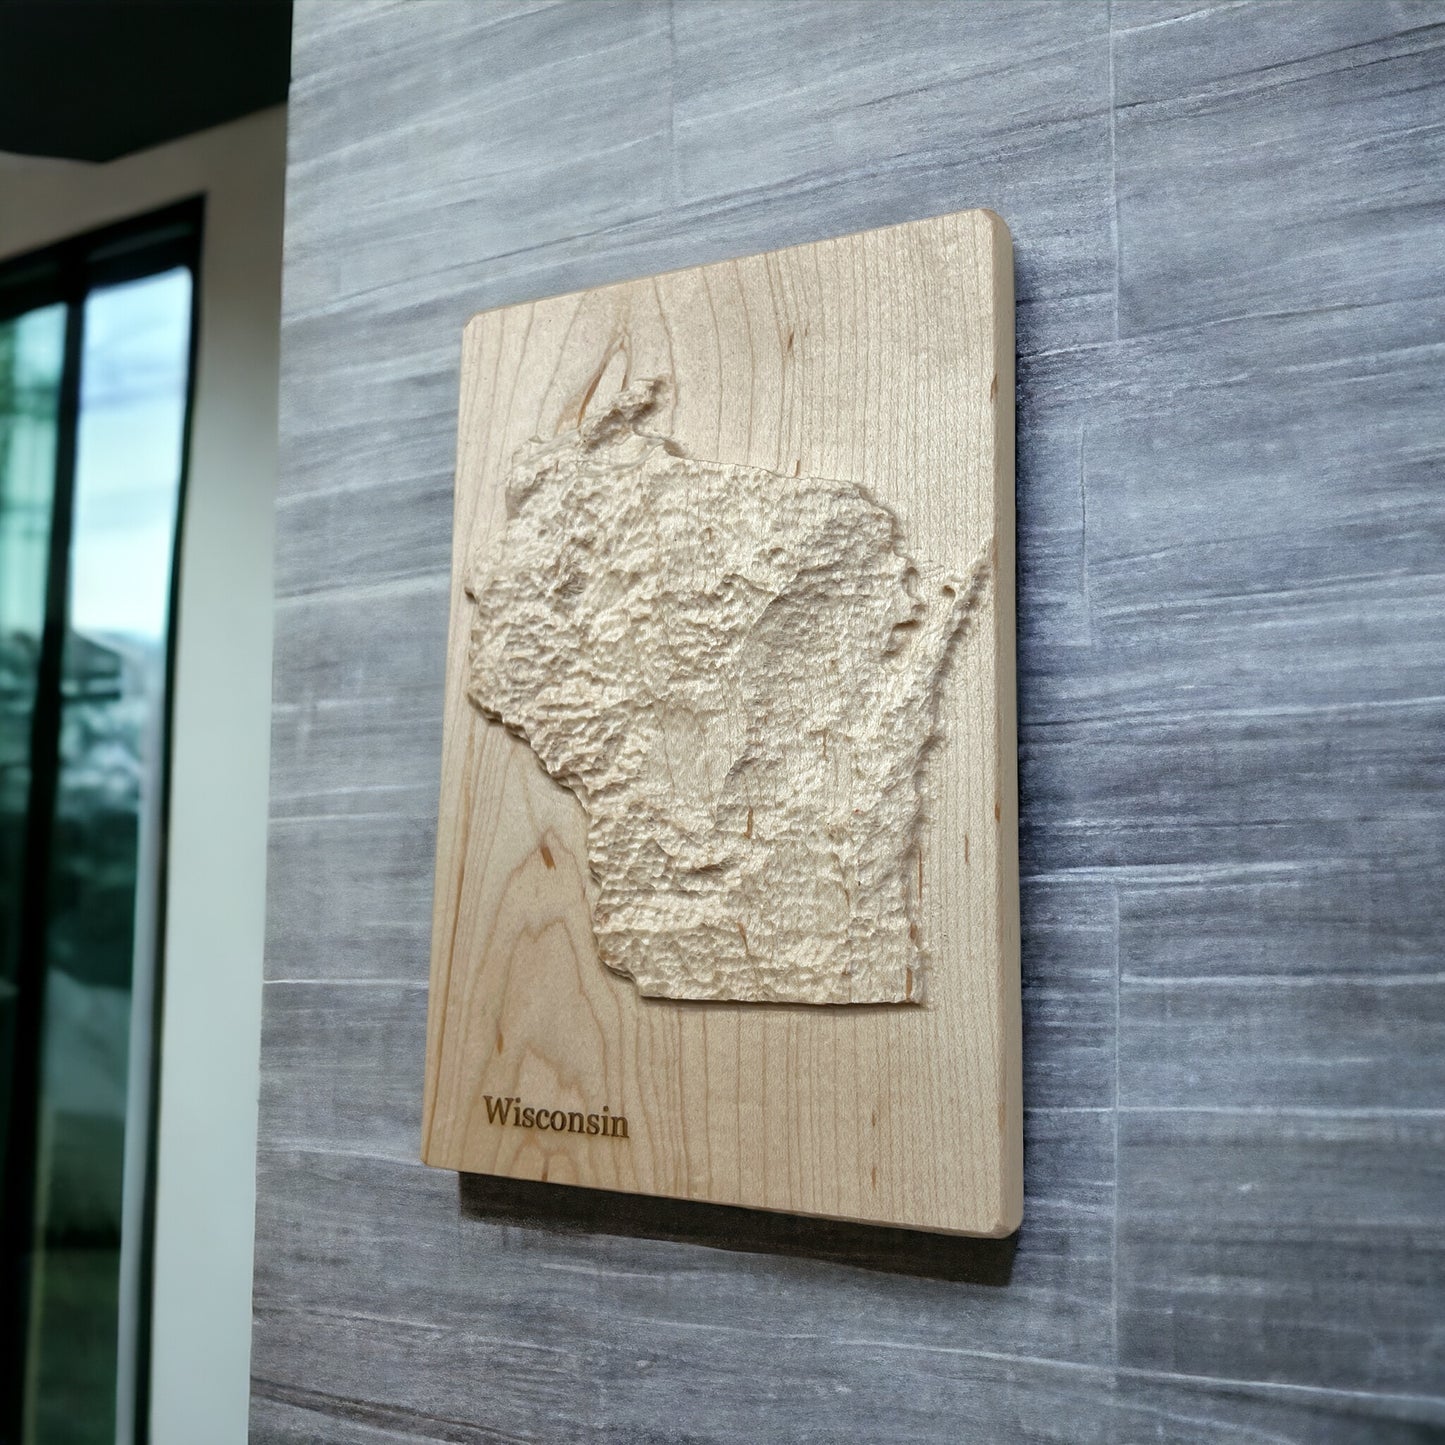 Wisconsin Map | 3D Topographic Wood Map Wisconsin | Wisconsin Gift | Wisconsin Art | Wisconsin Home Decor | Wisconsin Wood Carved Relief Map